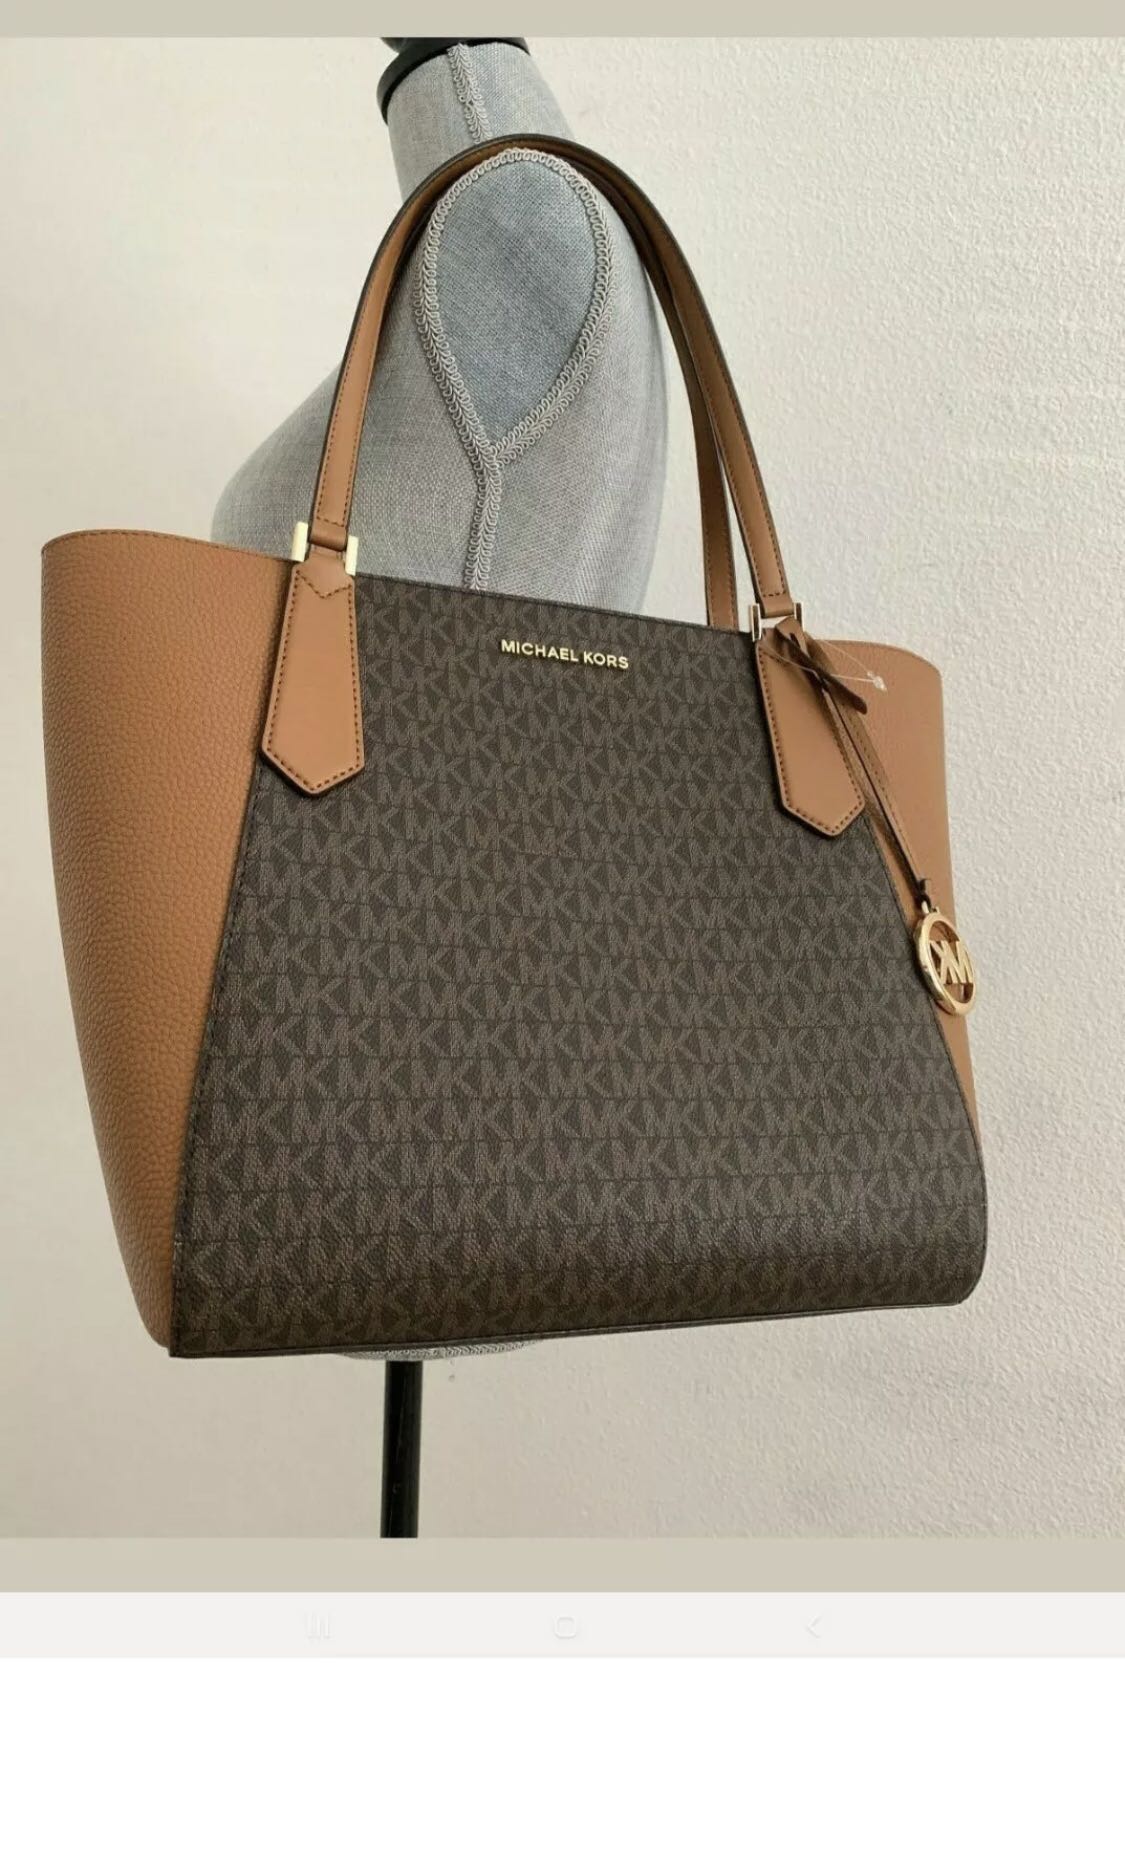 michael kors kimberly large tote, Up to 